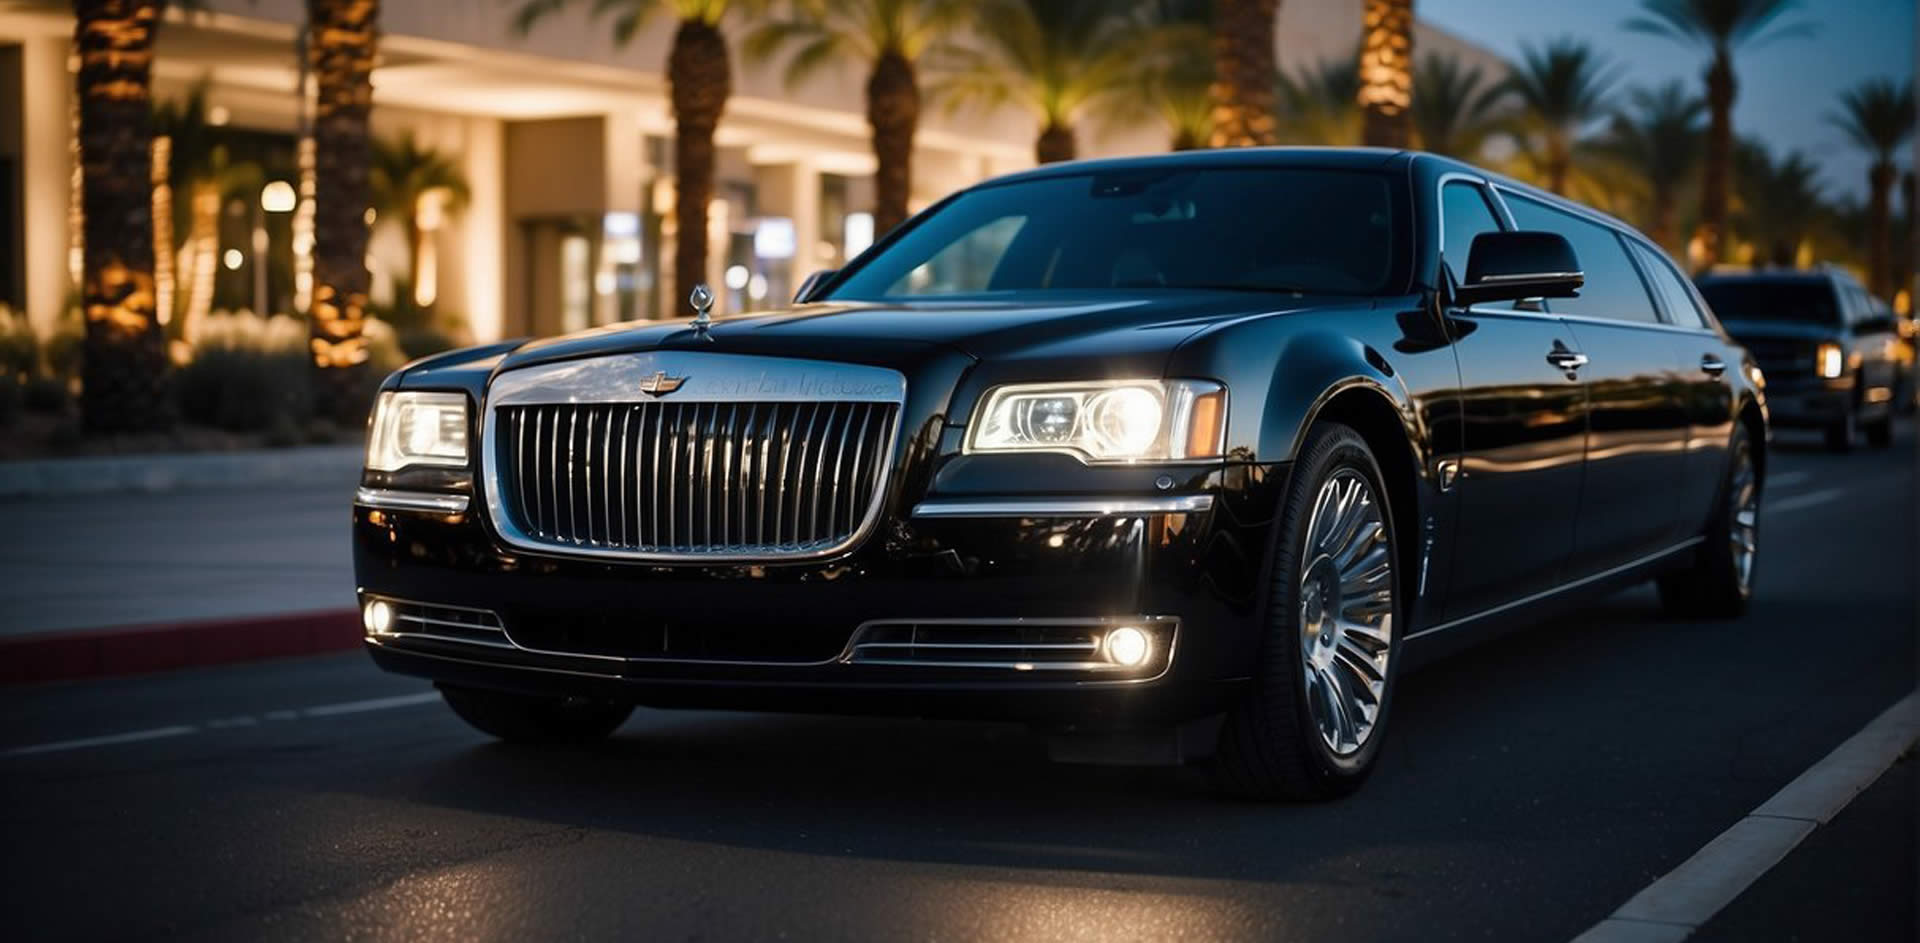 A sleek black limousine pulls up to the entrance of a luxurious Las Vegas airport, surrounded by palm trees and bright city lights